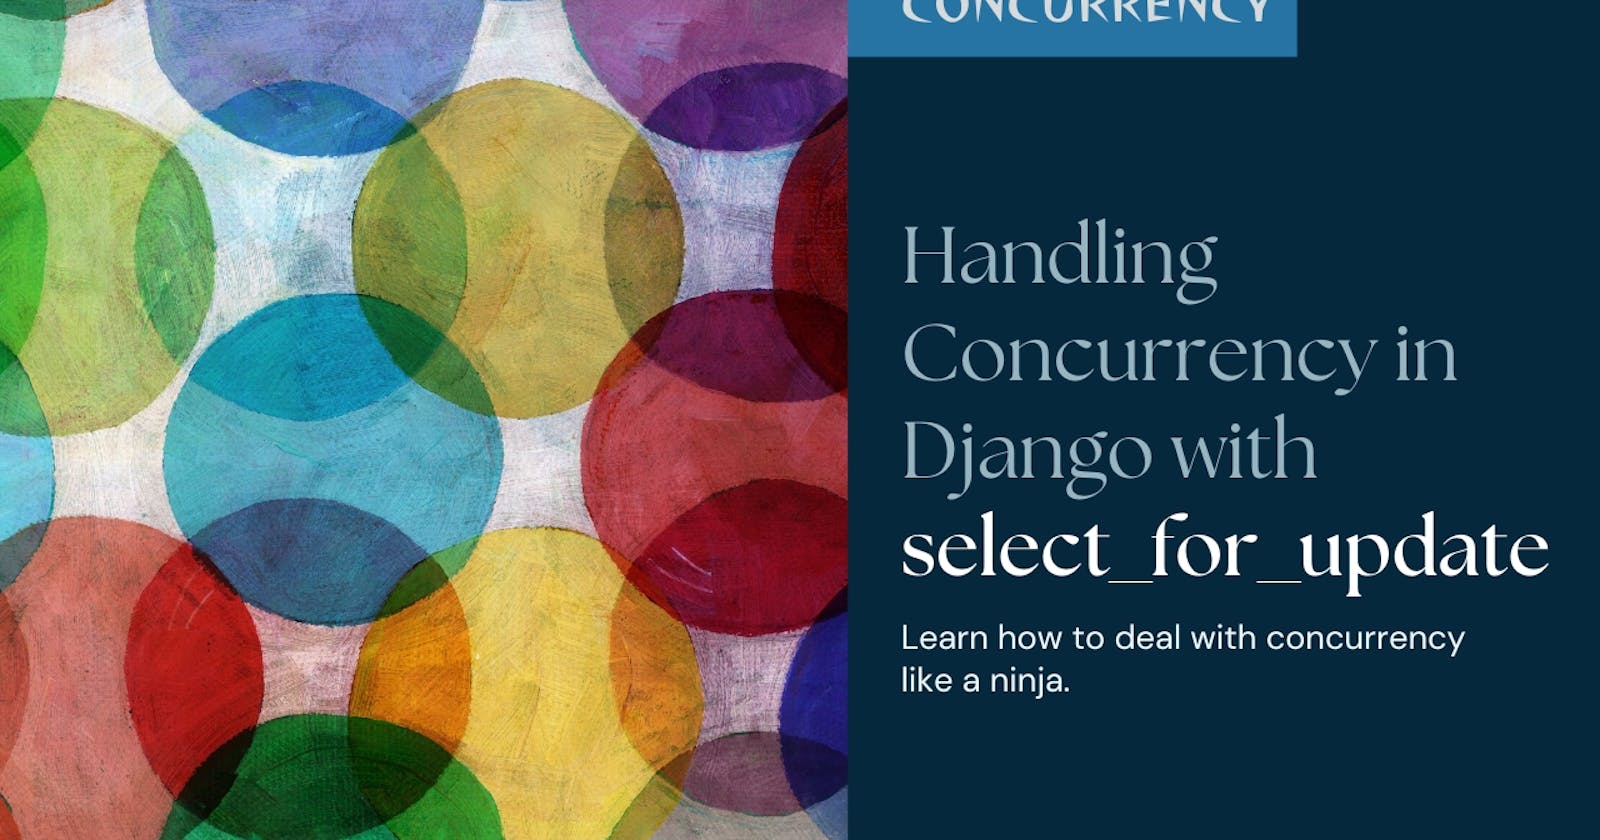 Handling Concurrency in Django with select_for_update